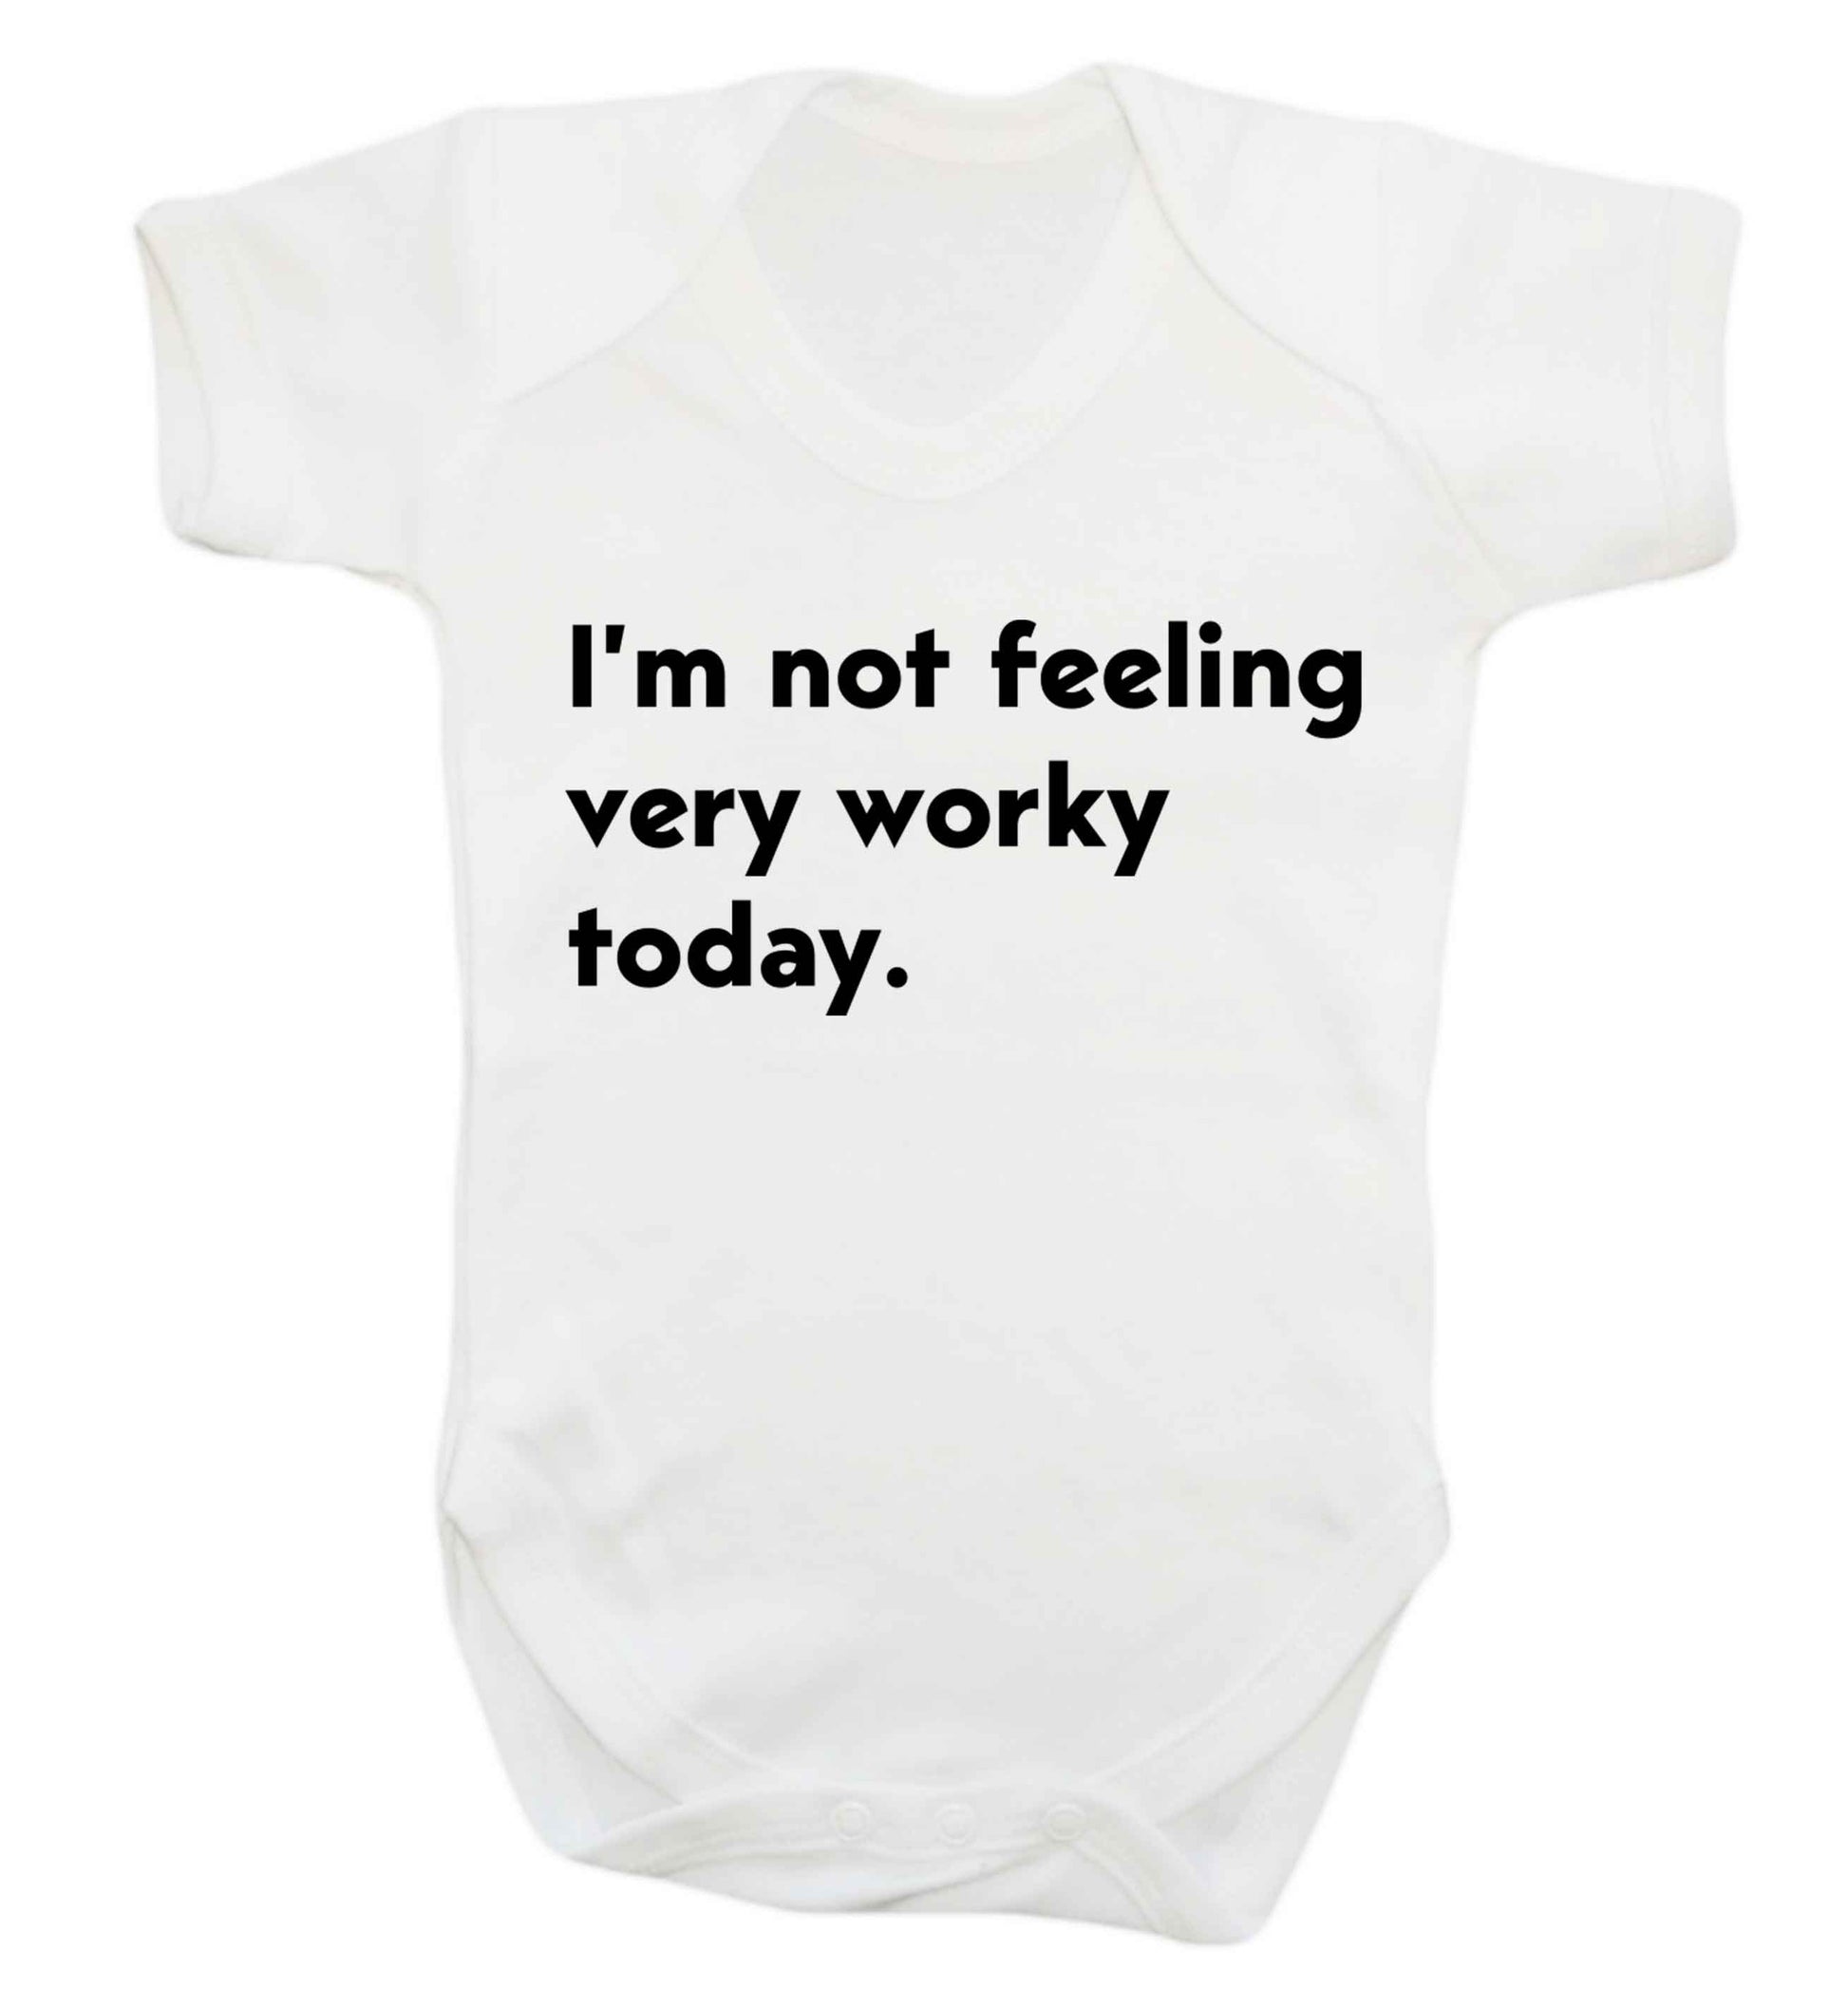 I'm not feeling very worky today Baby Vest white 18-24 months